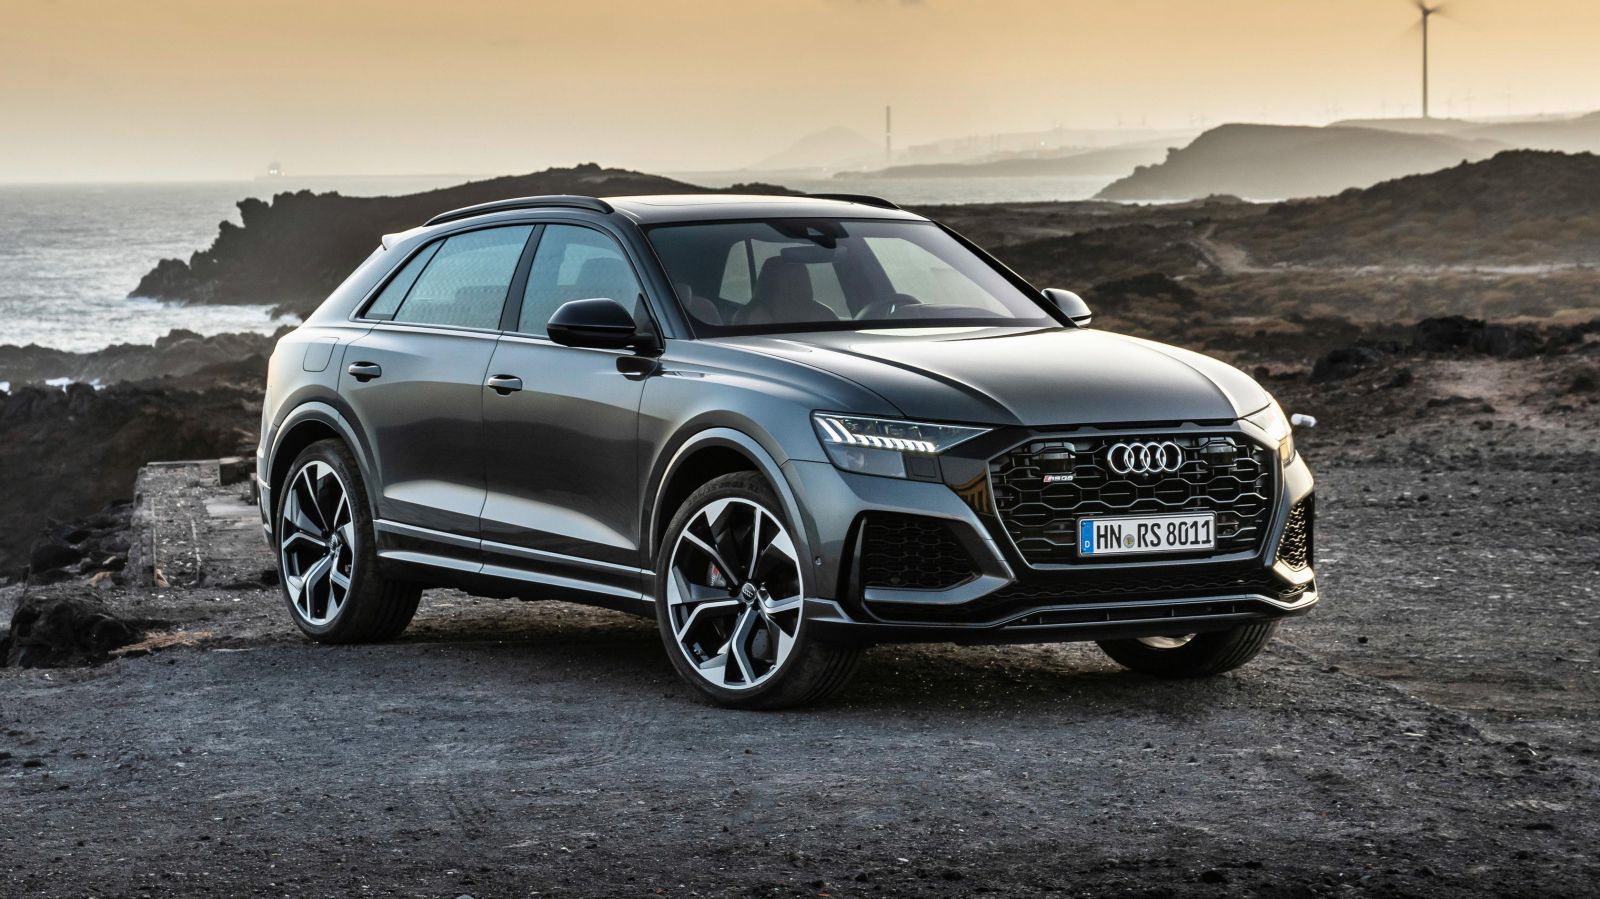 2020 Audi Rsq8 Price And Specs Carexpert 3679